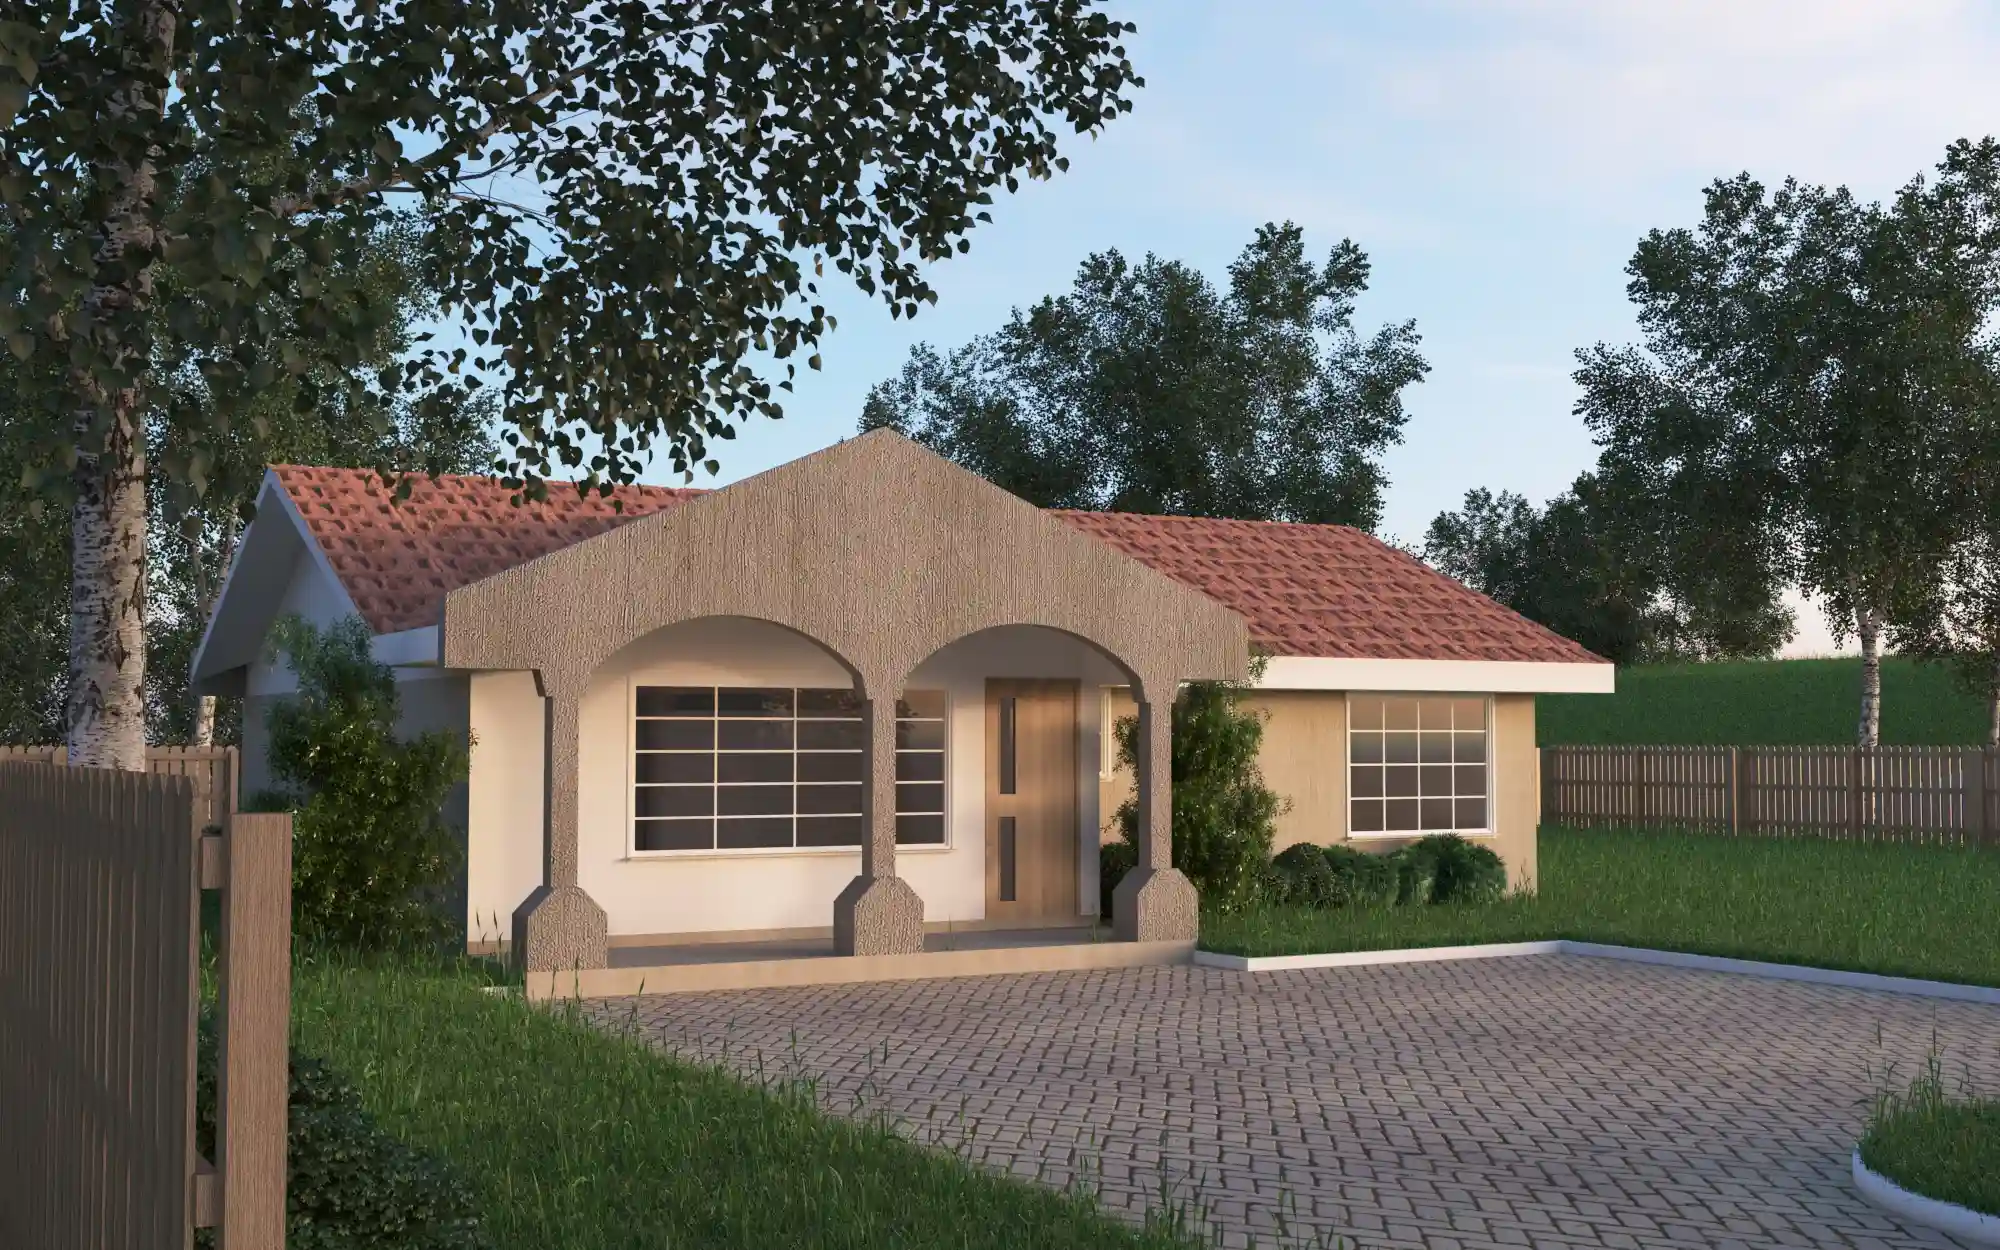 3 Bedroom Bungalow - ID 3163 - 3 BED BNGL TP6 OP3 FRONT.jpg from Inuua Tujenge house plans with 3 bedrooms and 2 bathrooms. ( bungalow )